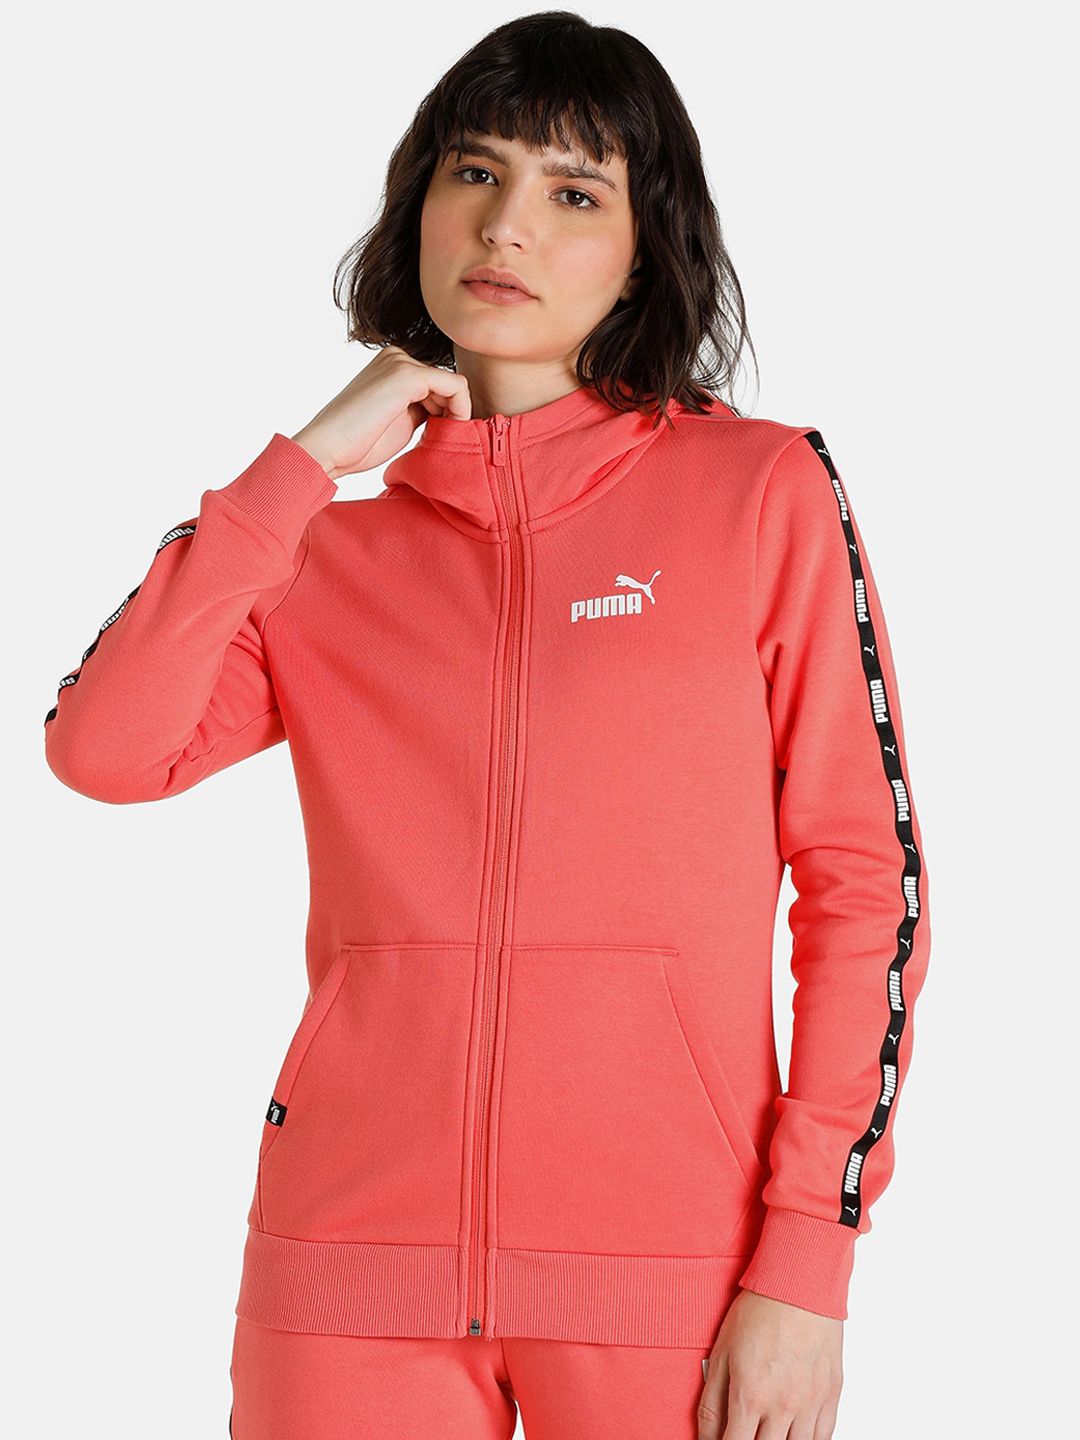 Puma Women Pink Printed Hooded Cotton Sporty Jackets Price in India